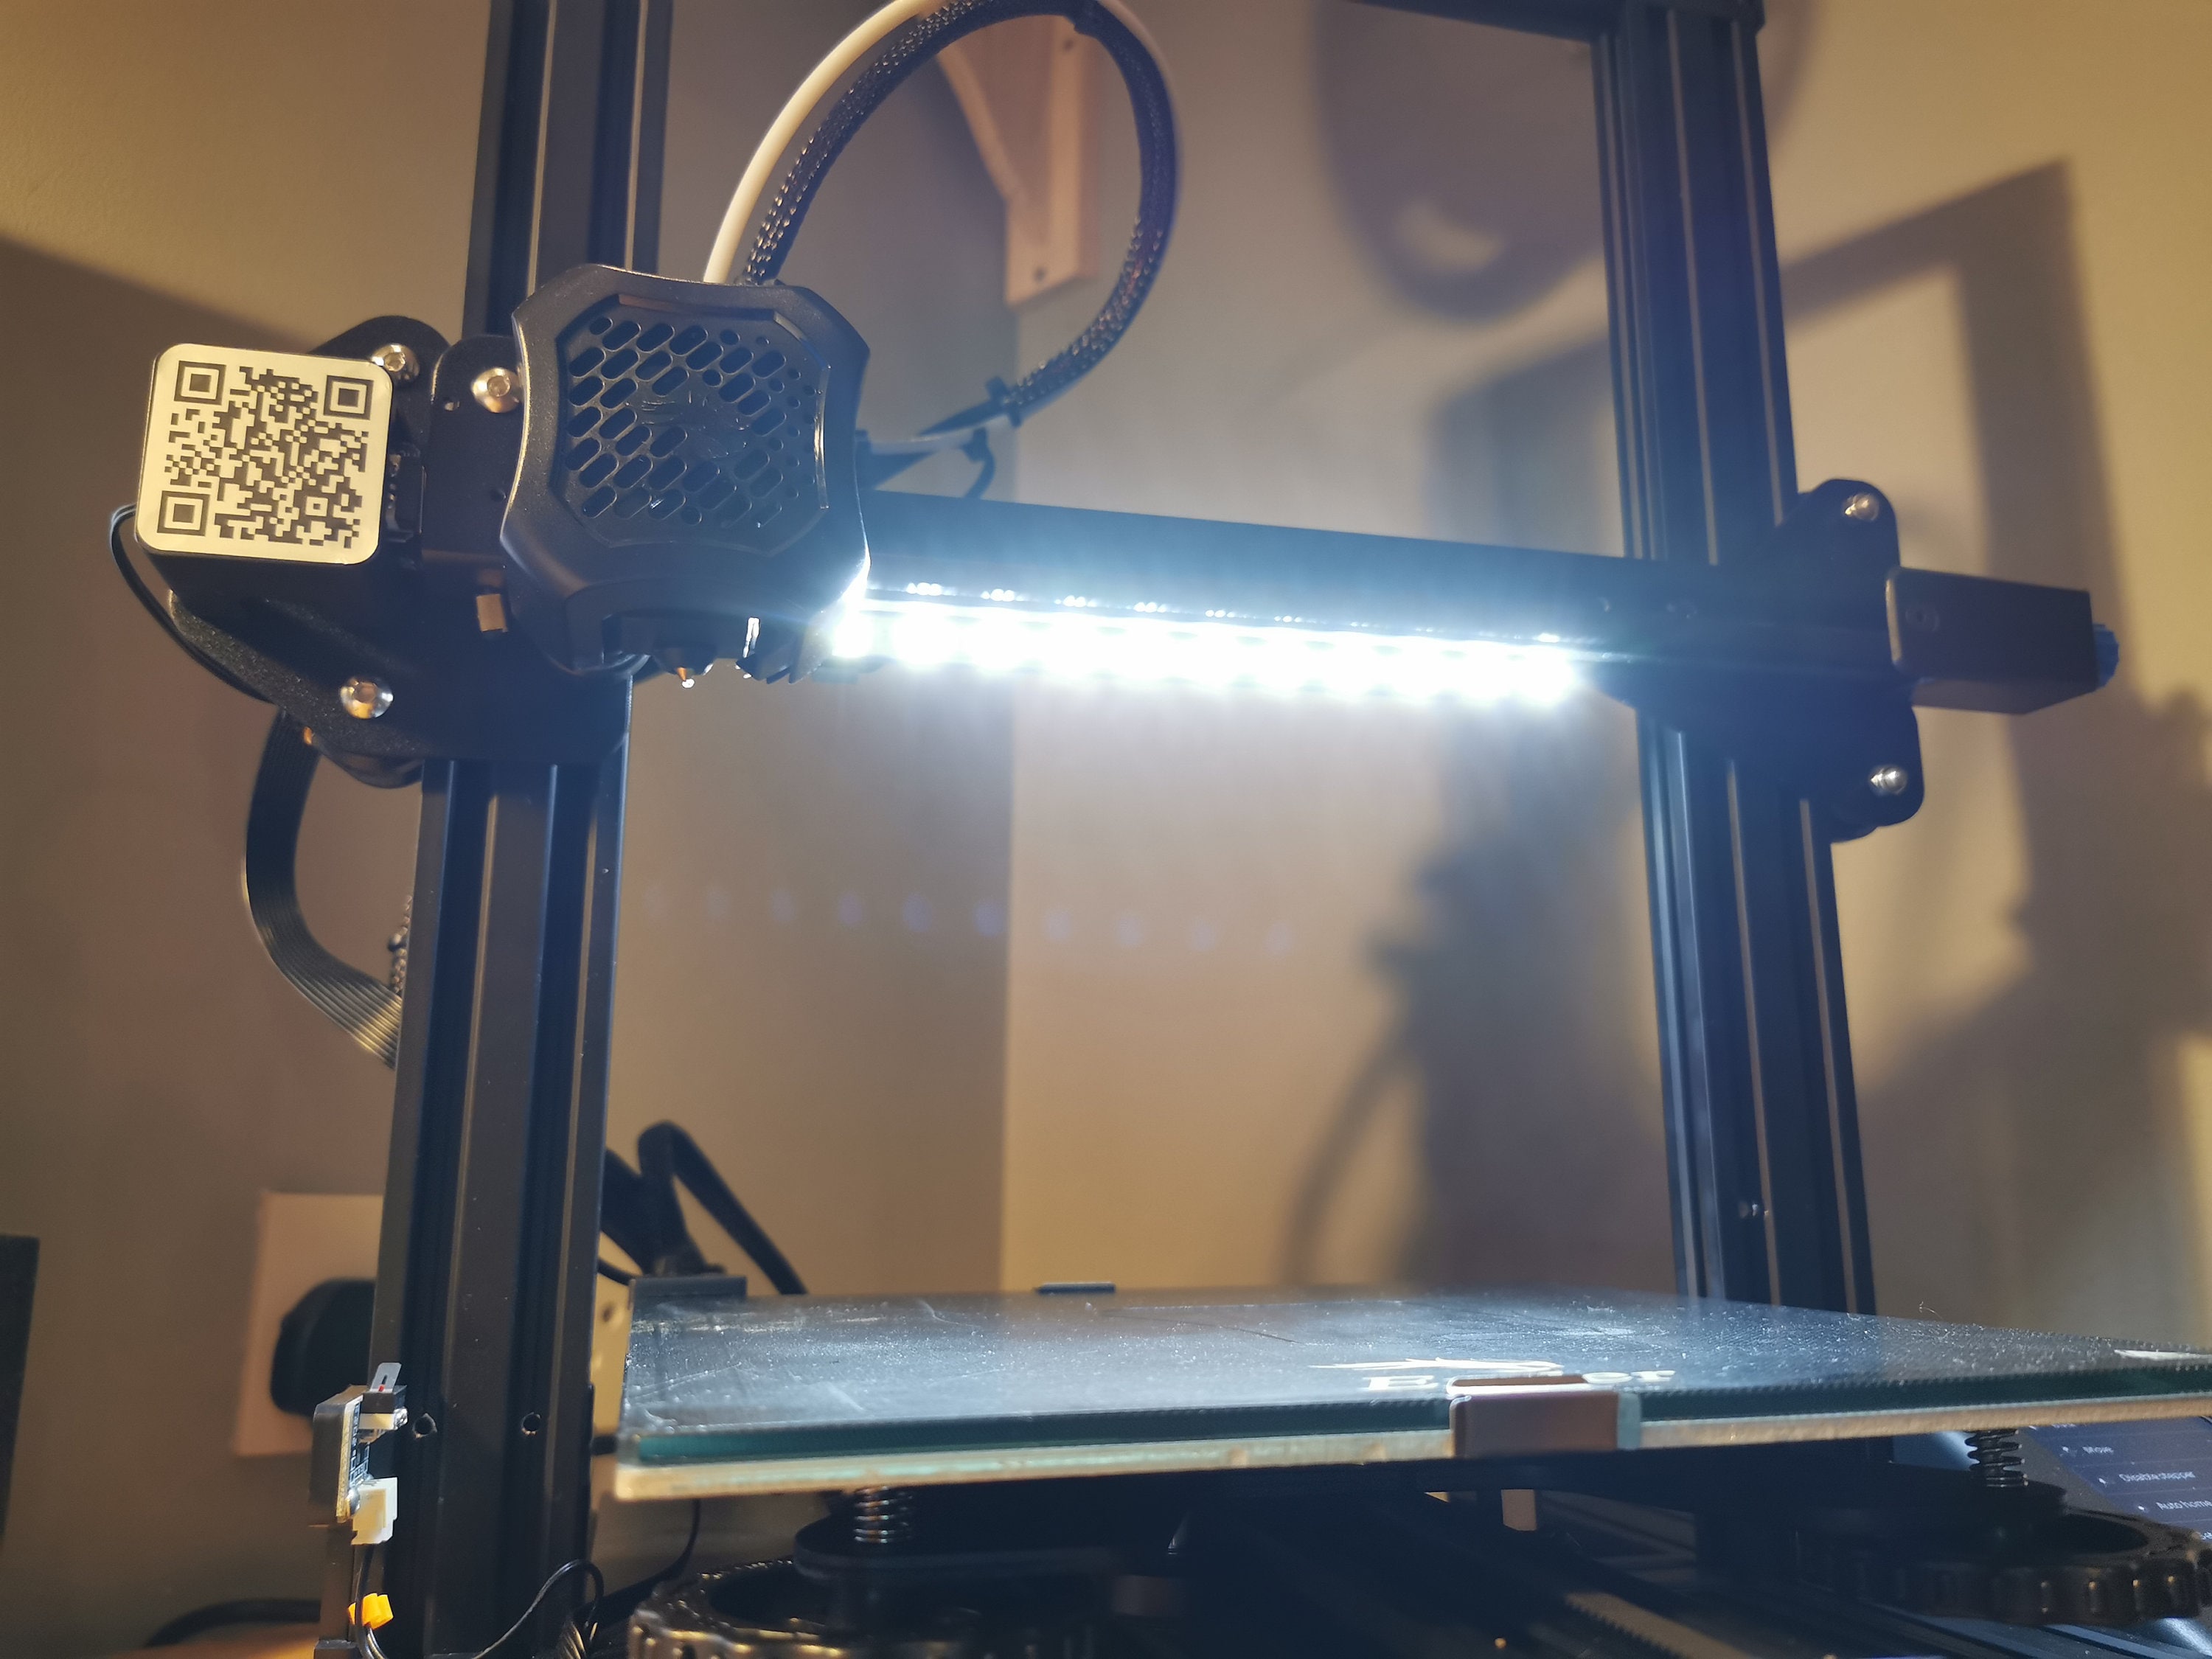 apparat Afstemning stramt 3D Printer Lighting Kit Creality Ender 3 Geeetech A30 A20 - Etsy